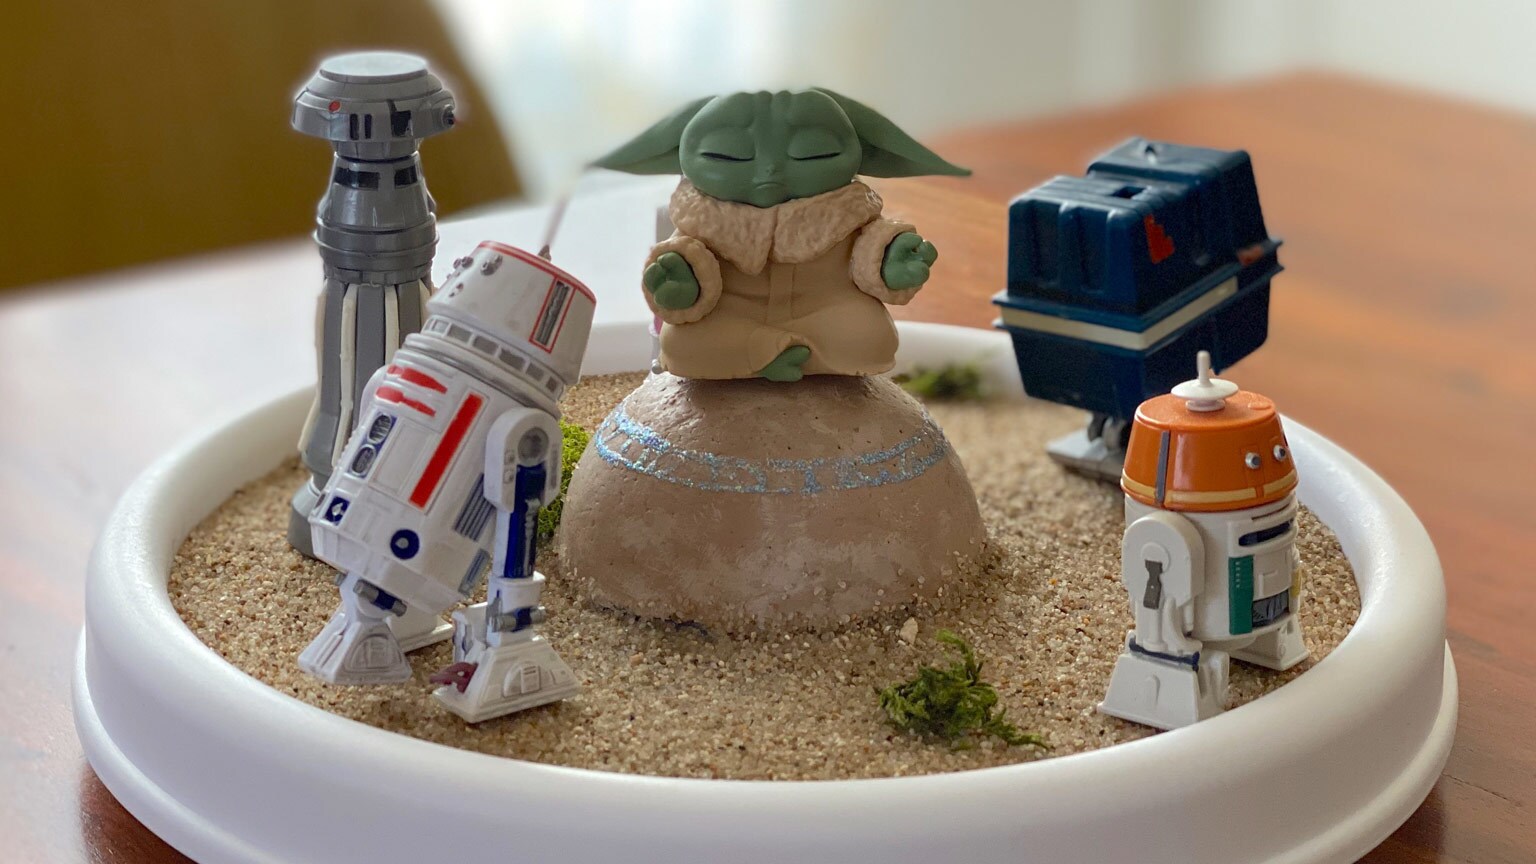 Your Favorite Action Figures Can Protect Grogu With This DIY Seeing Stone